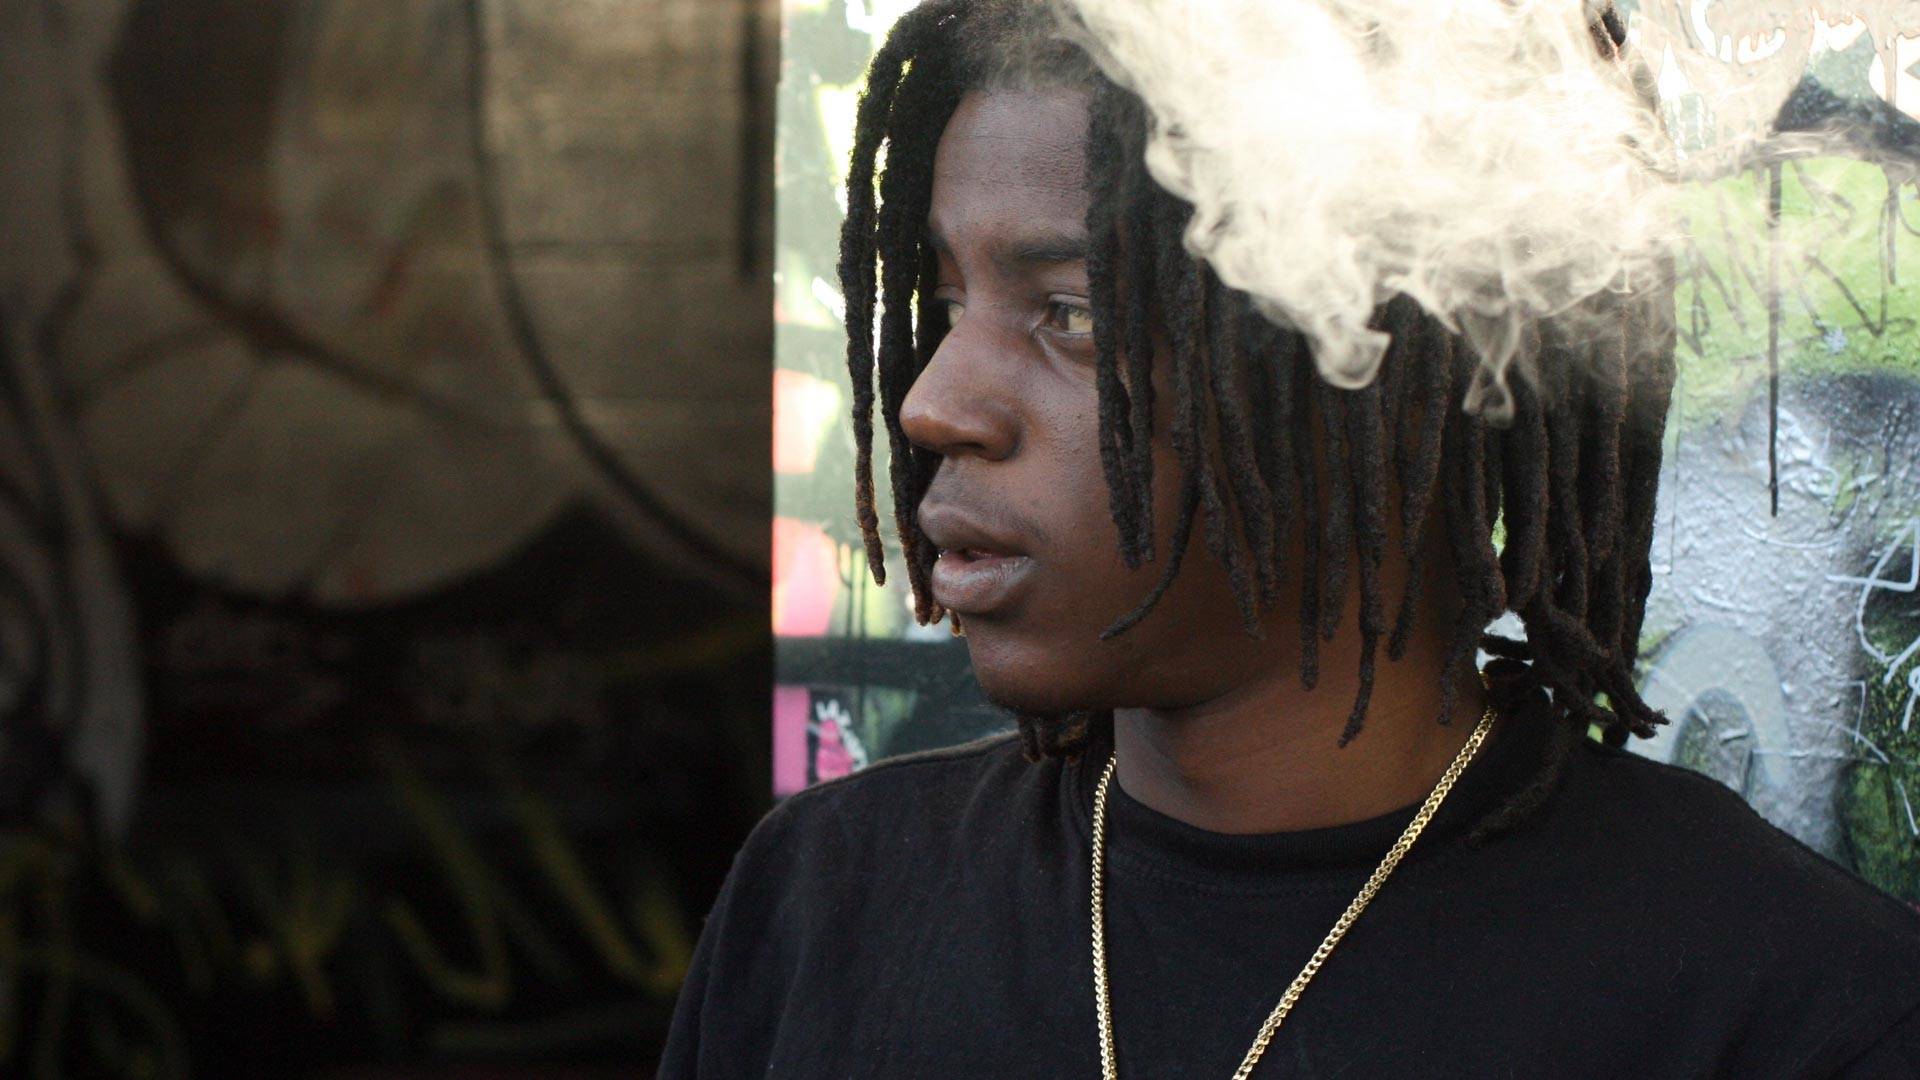 OMB Peezy has risen quickly in the Bay Area, but it may only be a matter of time before he moves back to the South. Gabe Meline/KQED